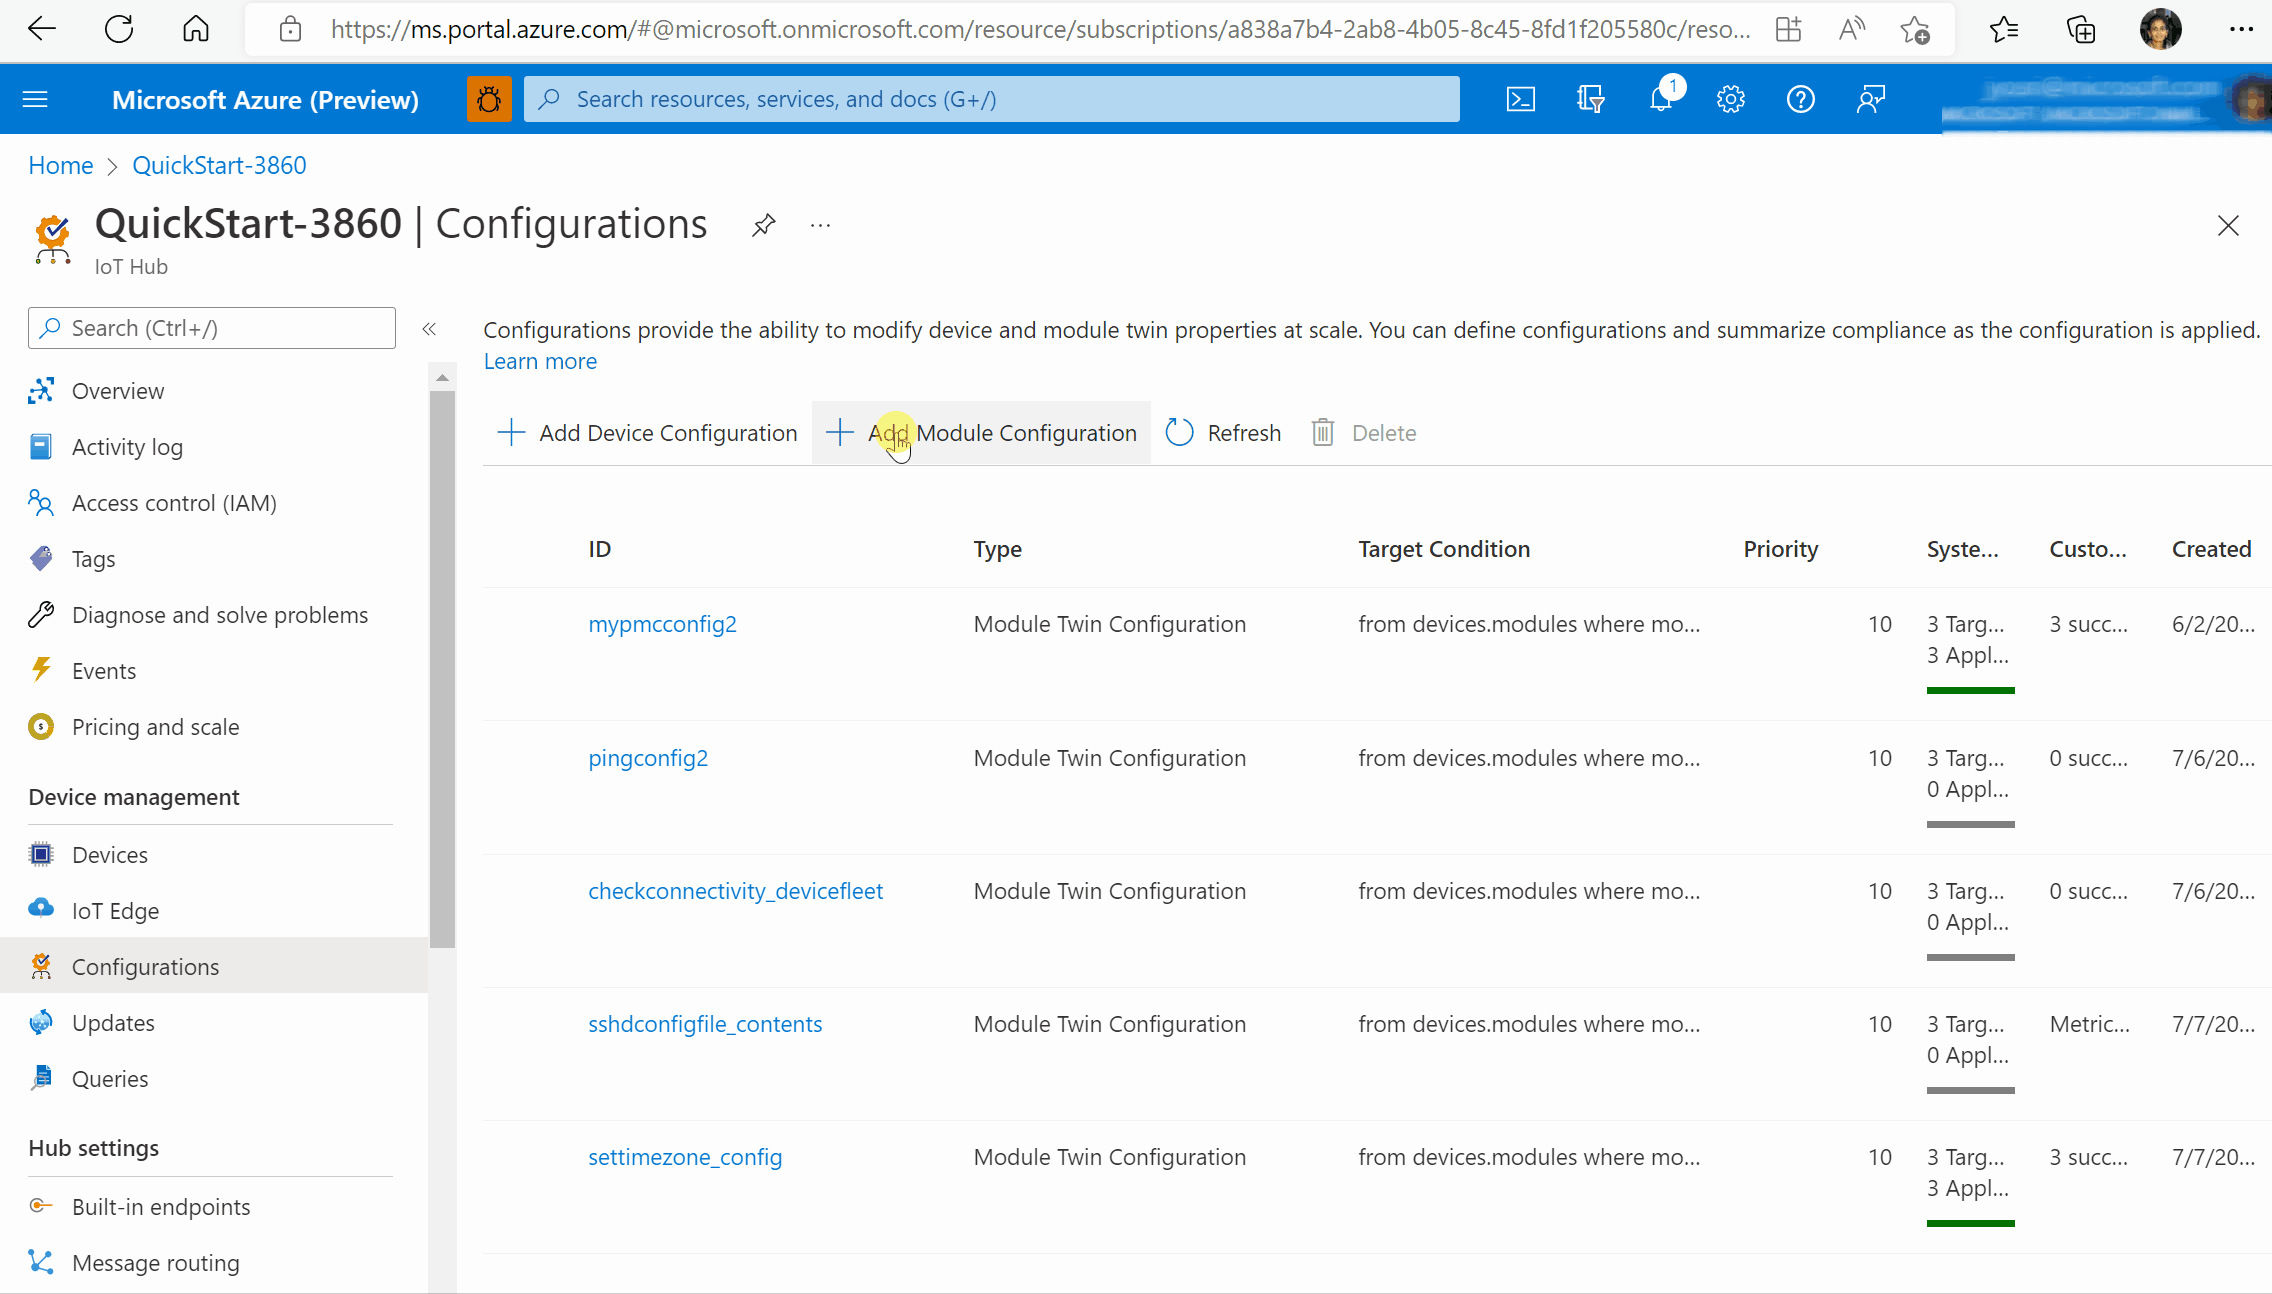 Screen capture showing how to create a configuration for updating timezone for a fleet of devices from Azure Portal